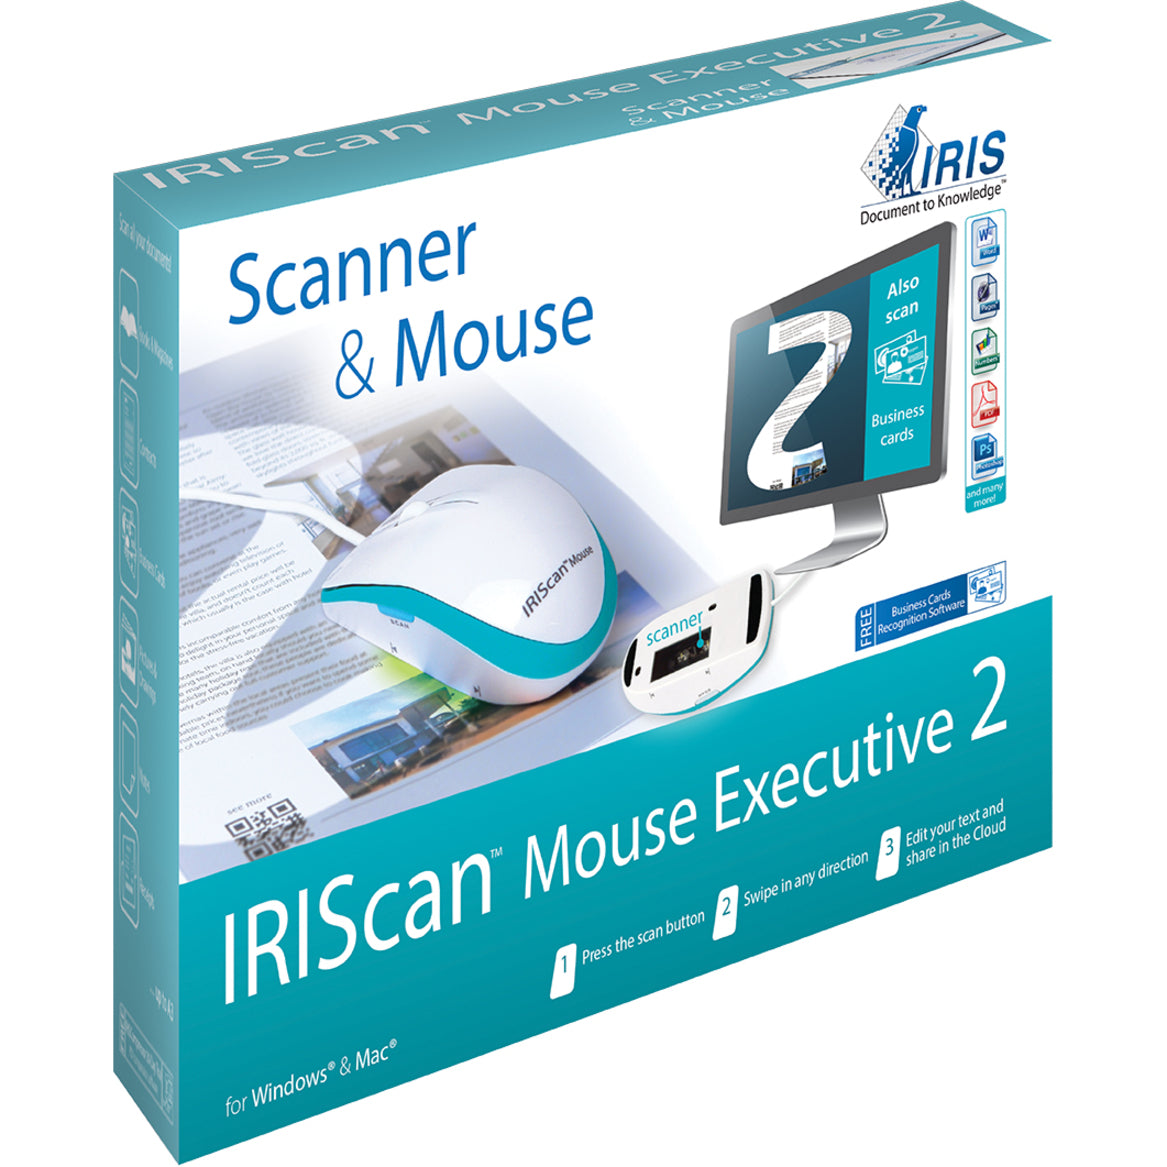 I.R.I.S. 458075 IRIScan Mouse Executive-Scanner & Mouse, All-In-One